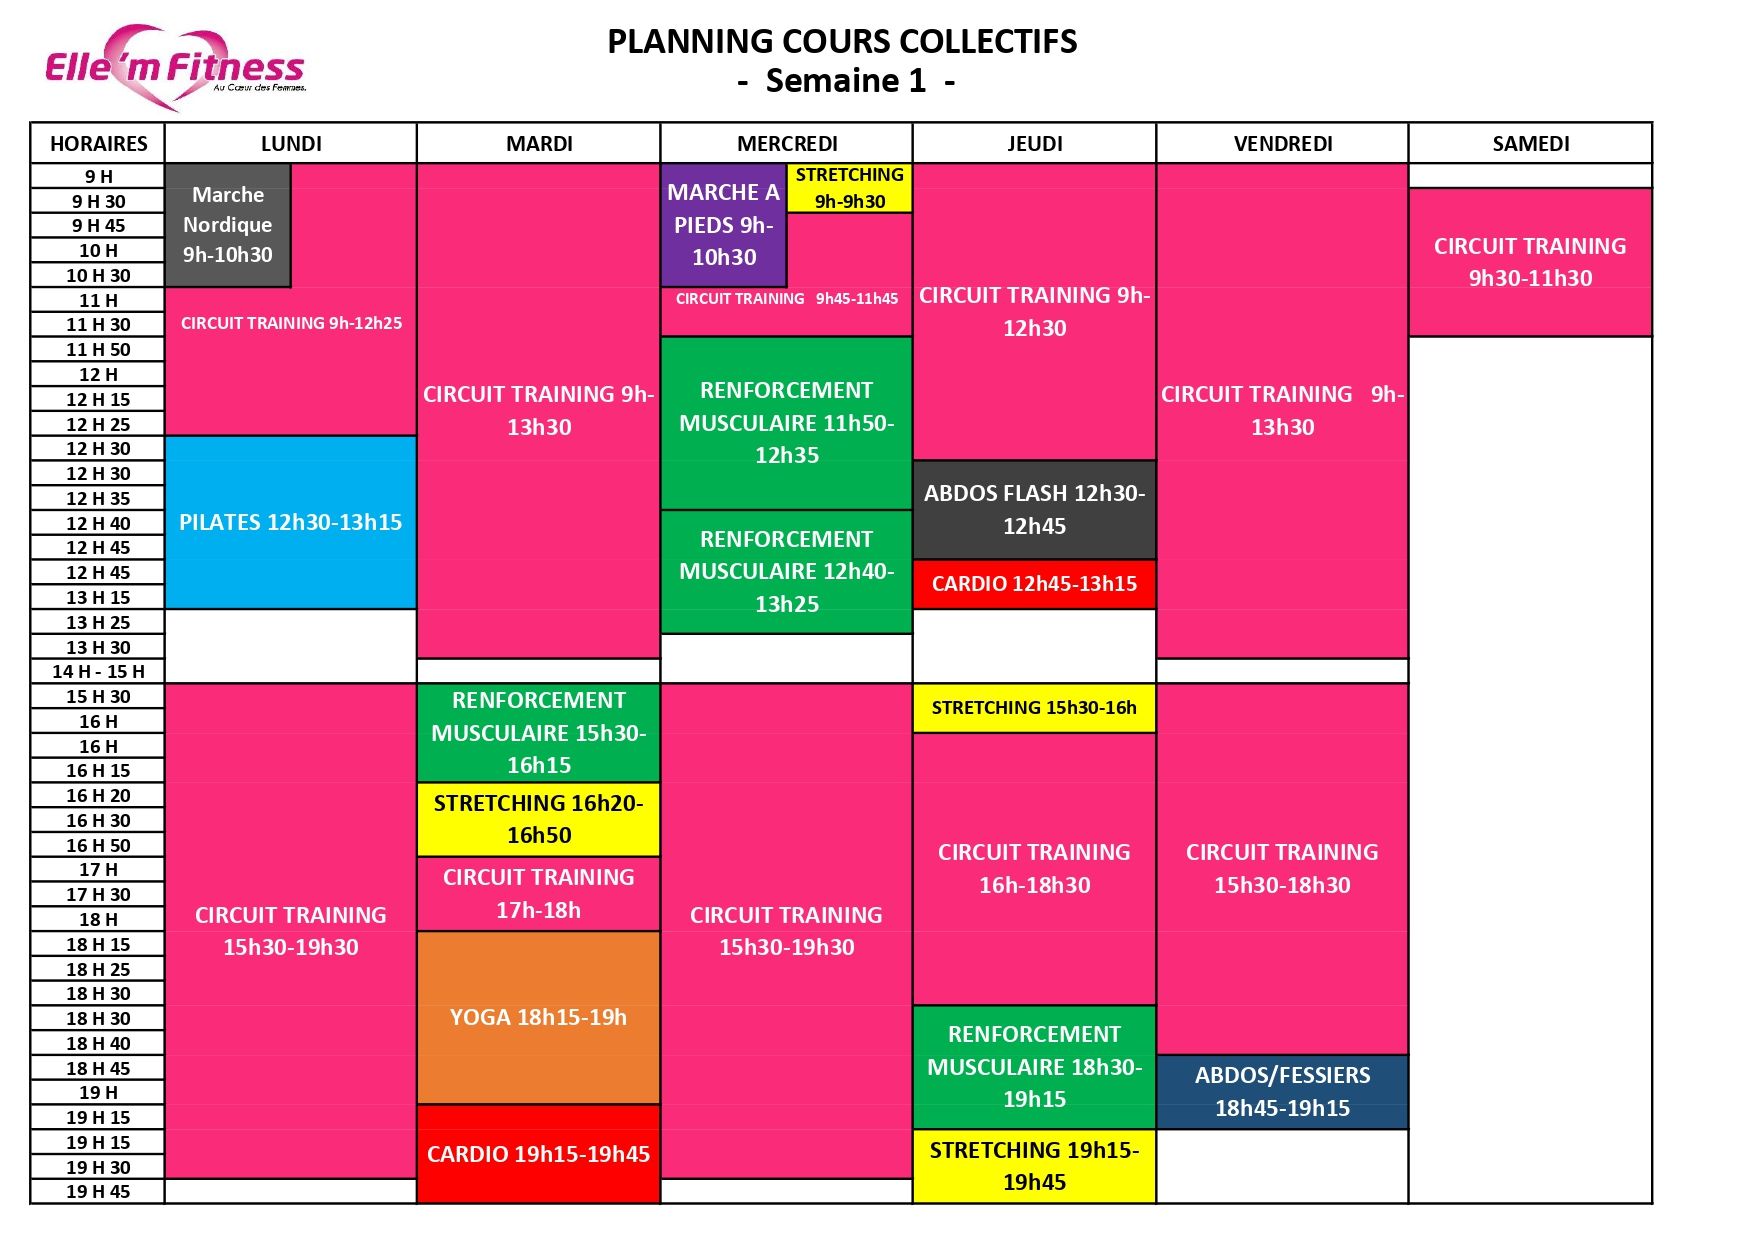 Planning cours semaine 1